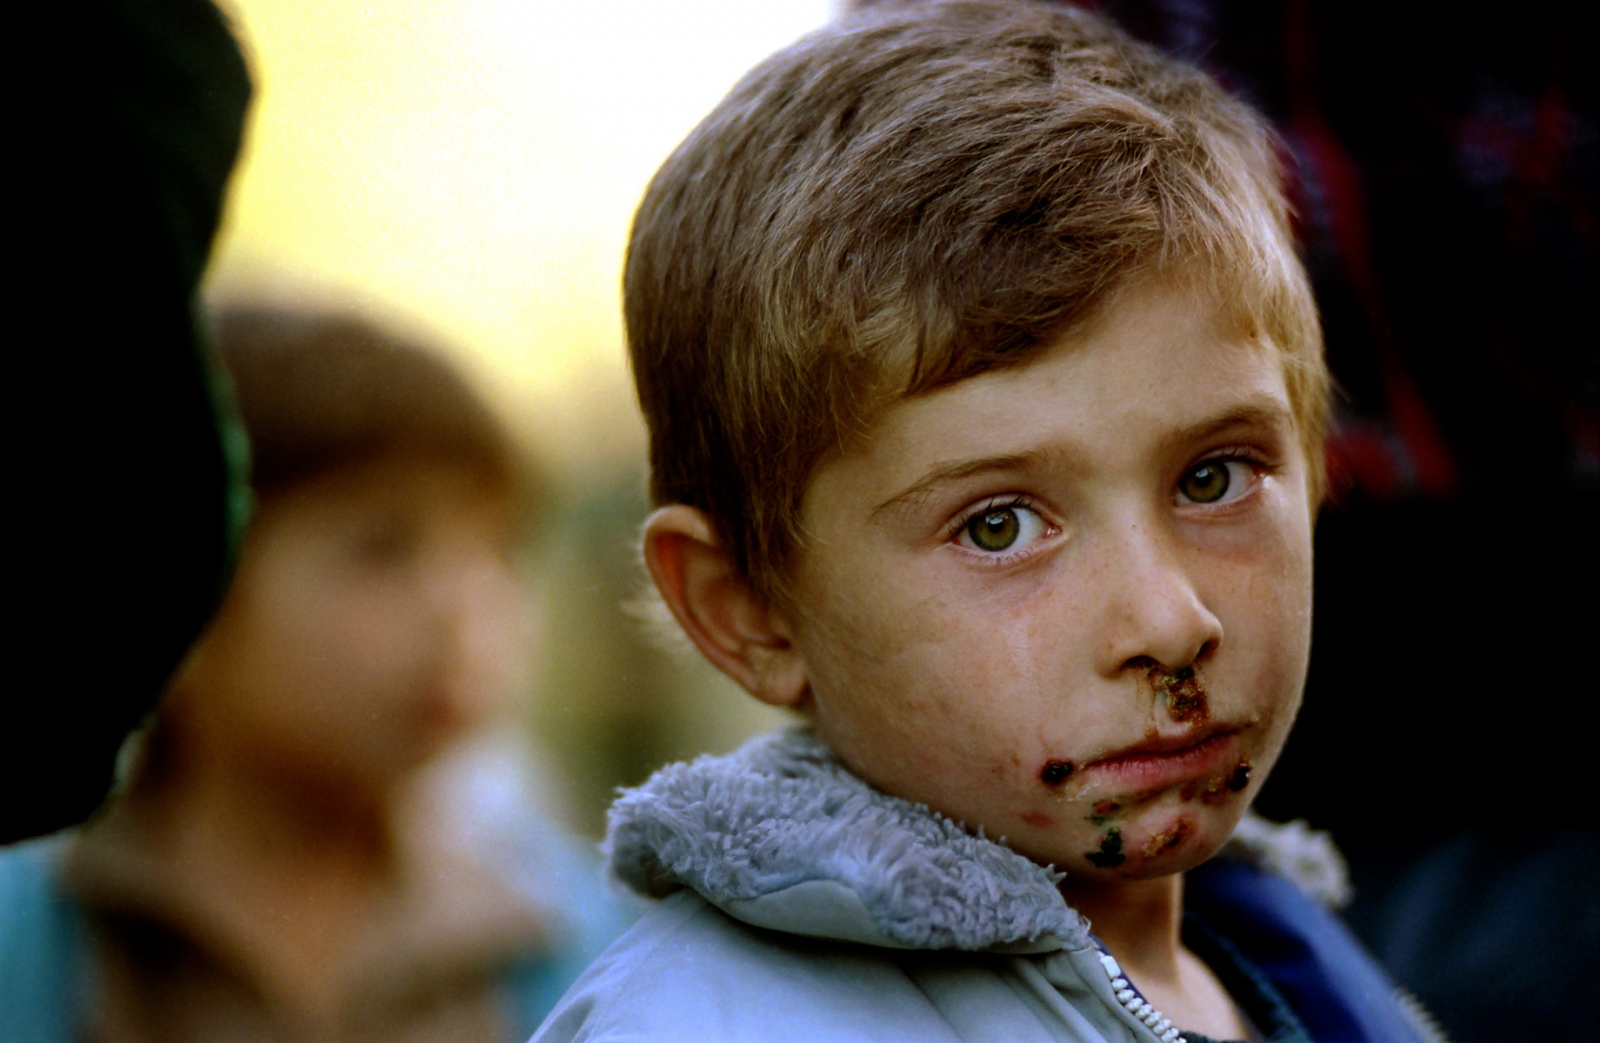 Forgotten Wars - A young boy's face is marked with frostbite after his...